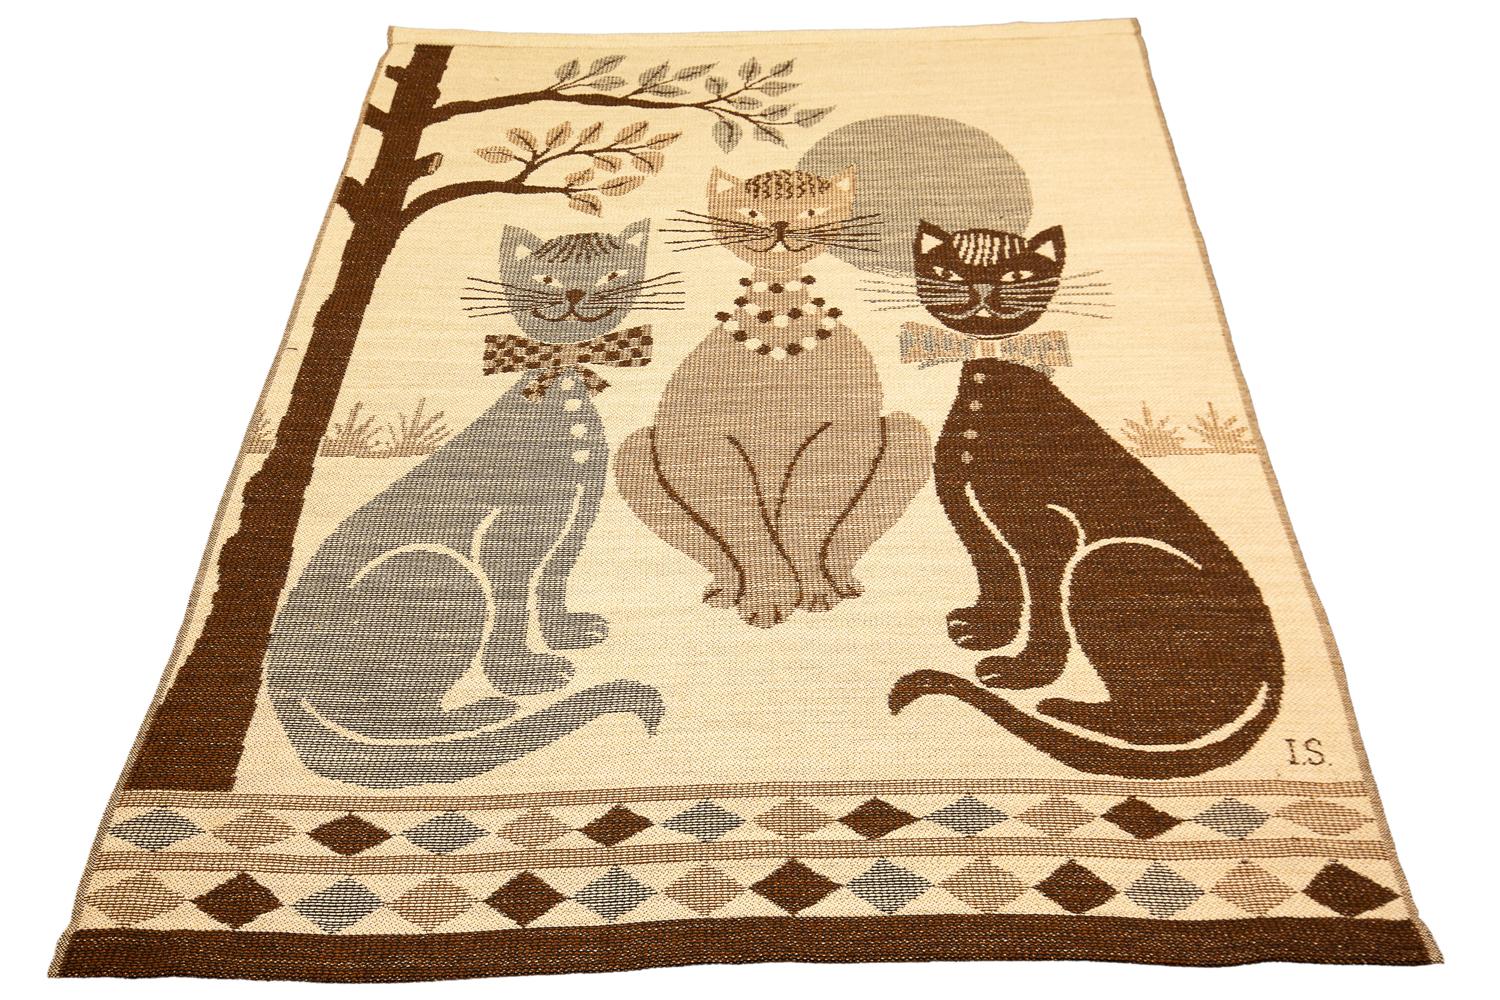 This is a European textile with a signature of IS in the bottom right-hand corner that measures 160 x 130CM in size. This piece depicts three cats sitting around each other two of them being male and one of them being female and having human